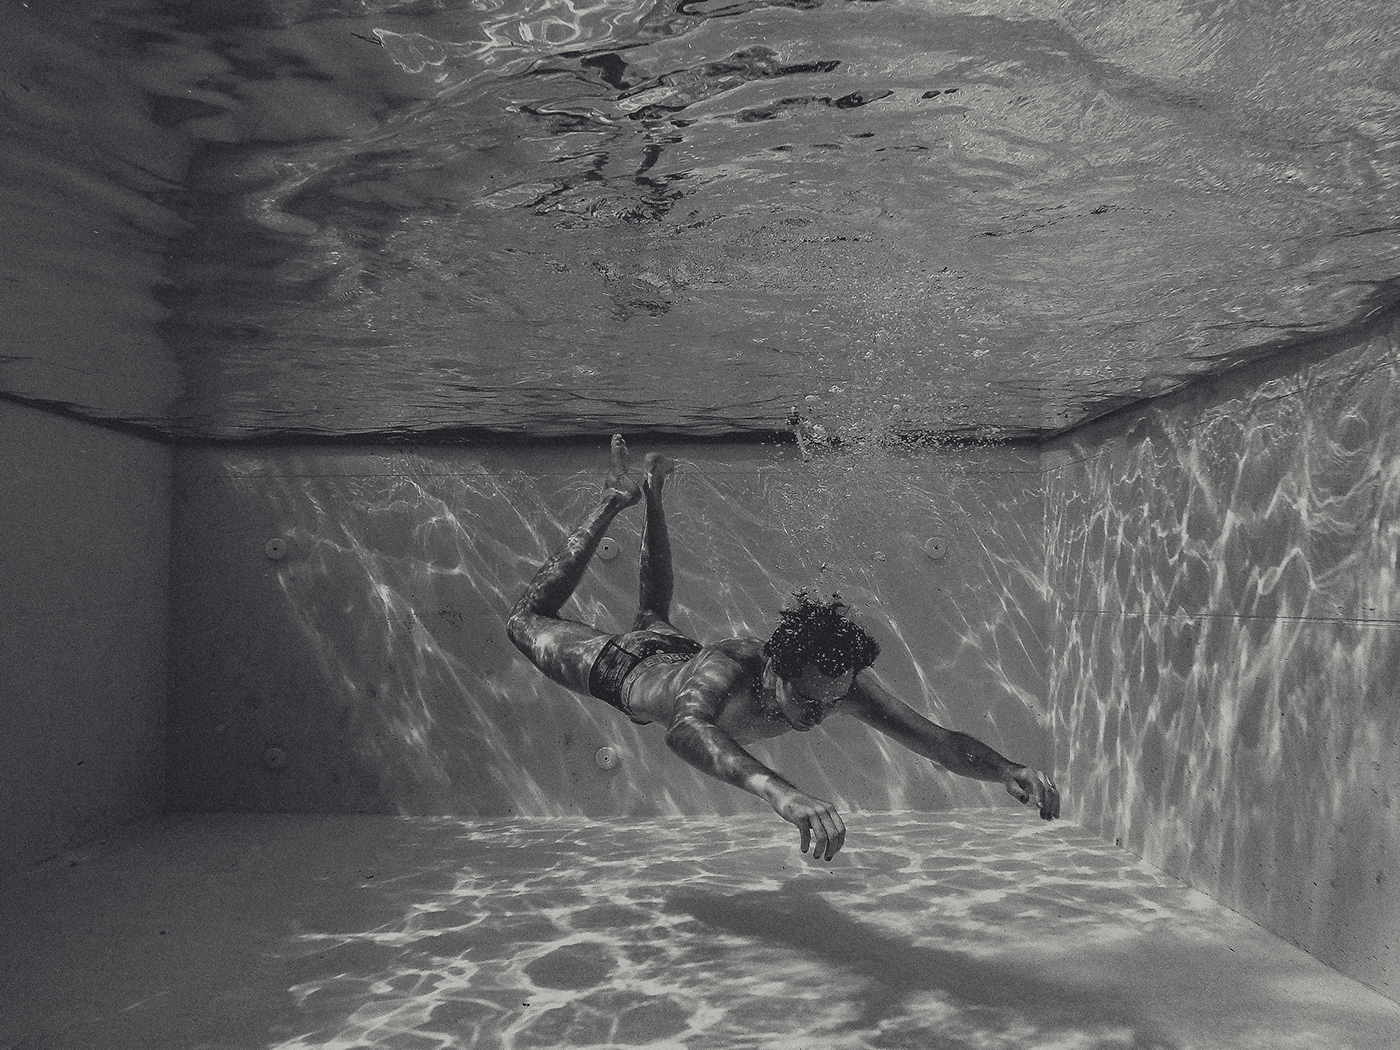 Image contains: male body in underwear, floating in pool, underwater shot